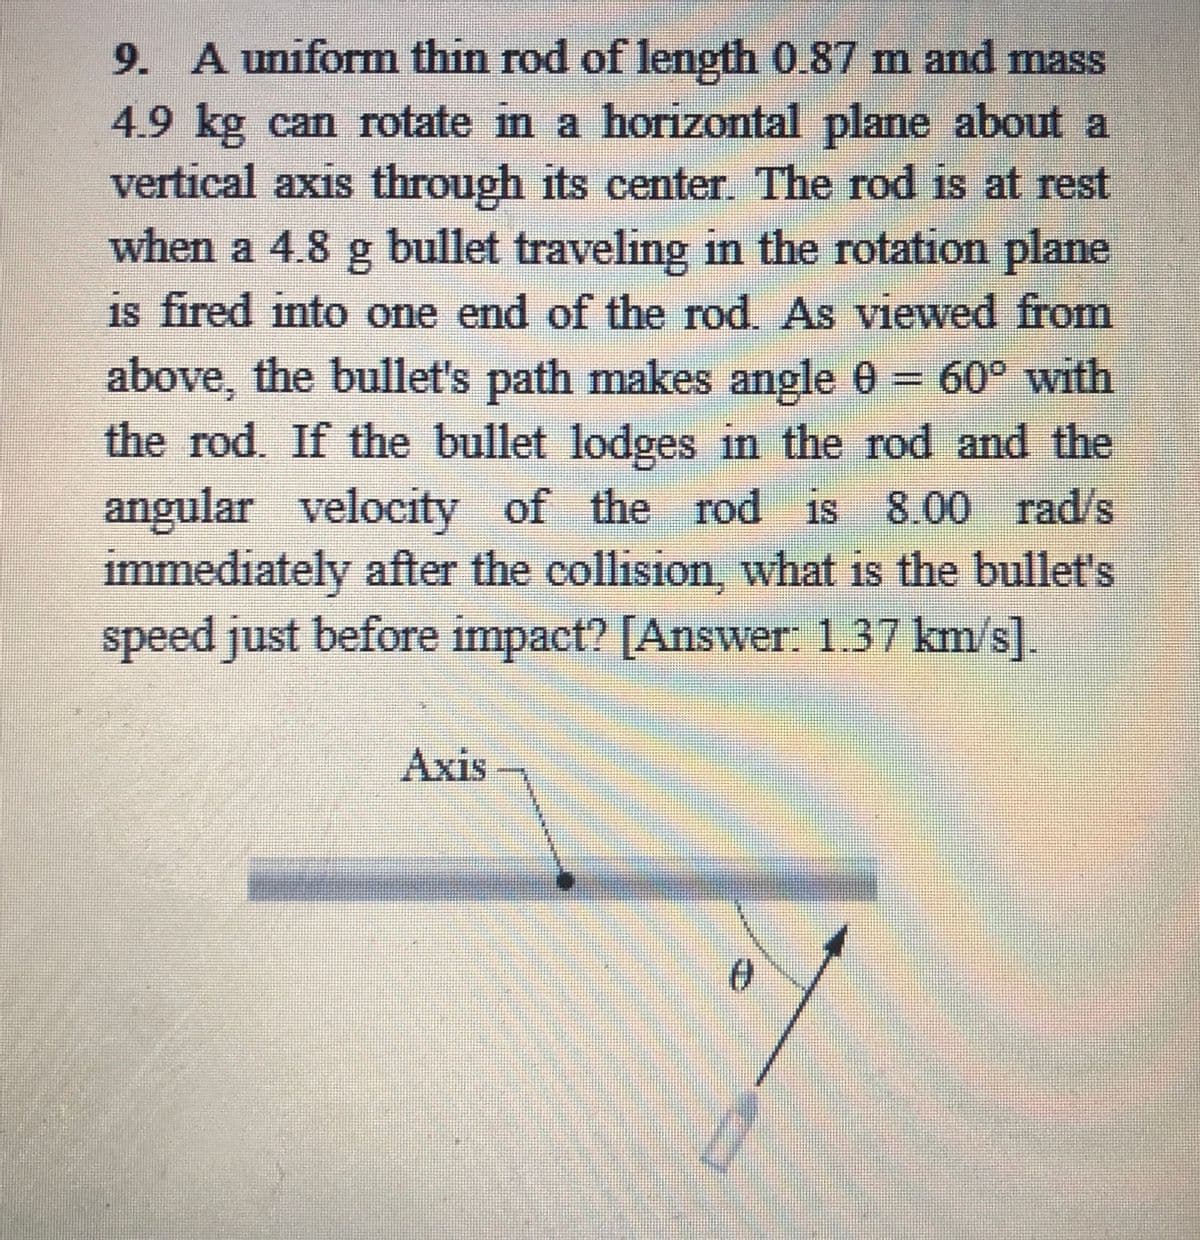 9. A uniform thin rod of length 0.87 m and mass
4.9 kg can rotate in a horizontal plane about a
vertical axis through its center The rod is at rest
15
when a 4.8 g bullet traveling in the rotation plane
is fired into one end of the rod. As viewed from
above, the bullet's path makes angle 0 = 60° with
the rod. If the bullet lodges in the rod and the
angular velocity of the rod is
immediately after the collision, what is the bullet's
speed just before impact? [Answer: 1.37 km/s]
%3D
8.00 rad/s
Аxis
